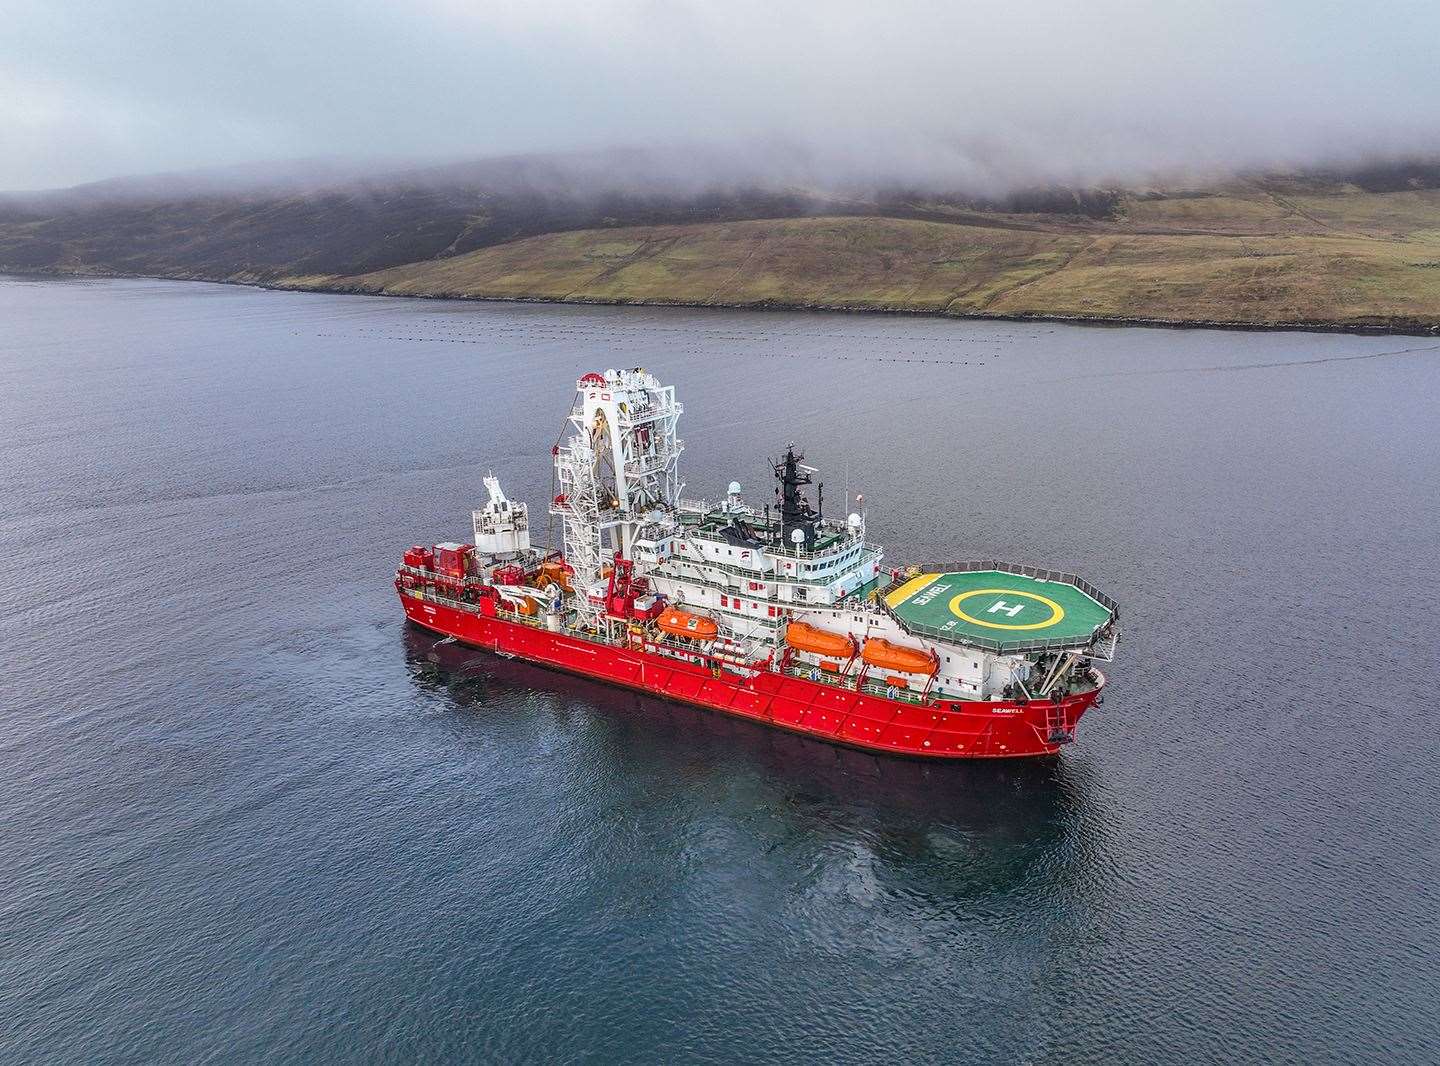 The specialist vessel Seawell has played a key role in the Shetland HVDC link project. Picture: Calum Fraser Photography